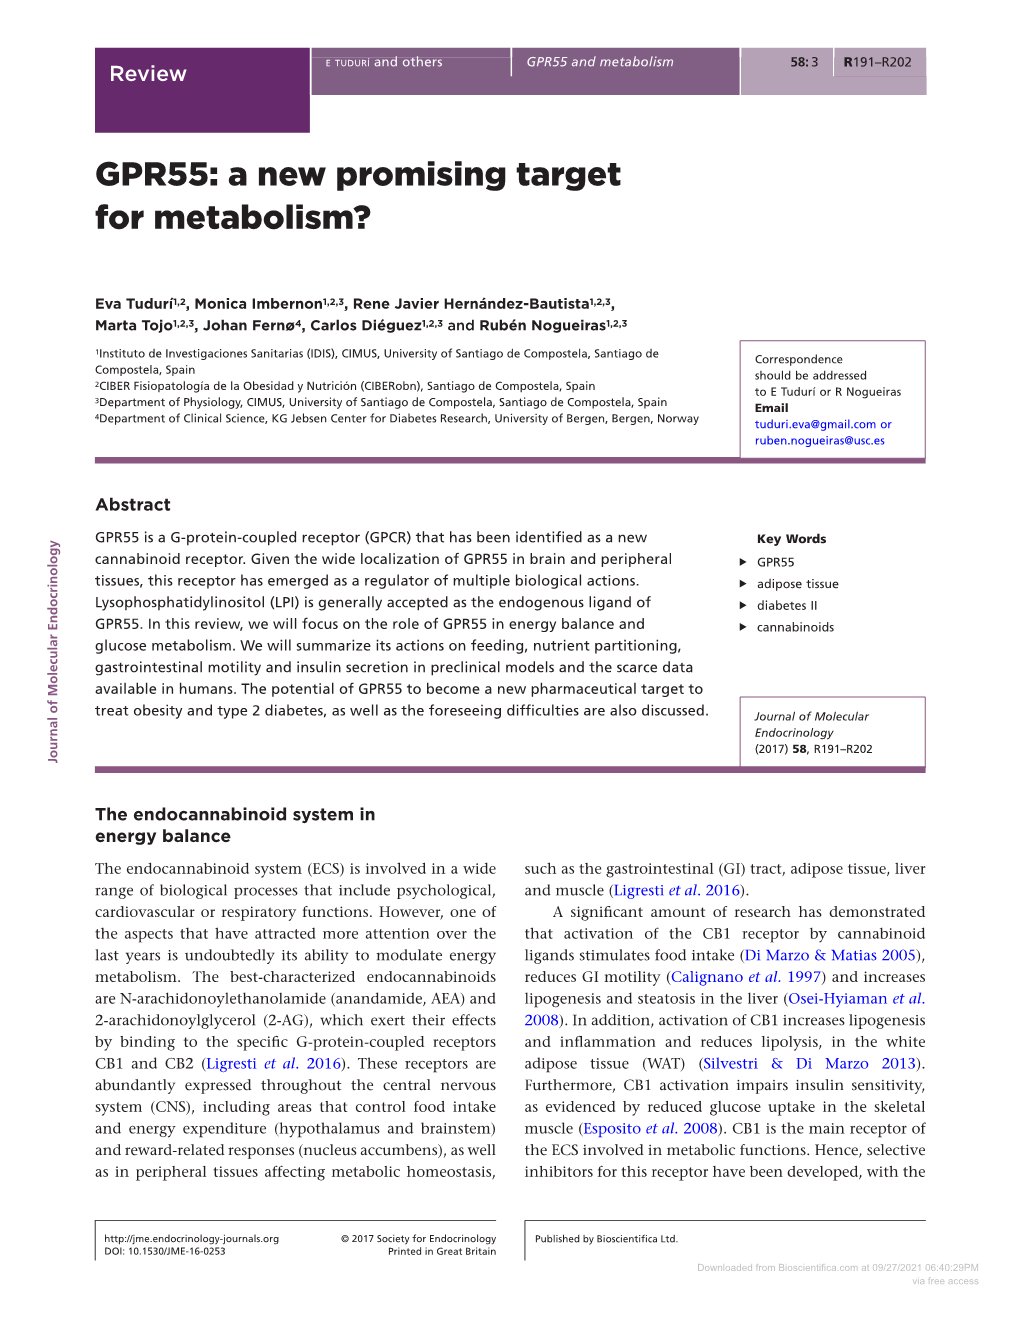 GPR55: a New Promising Target for Metabolism?